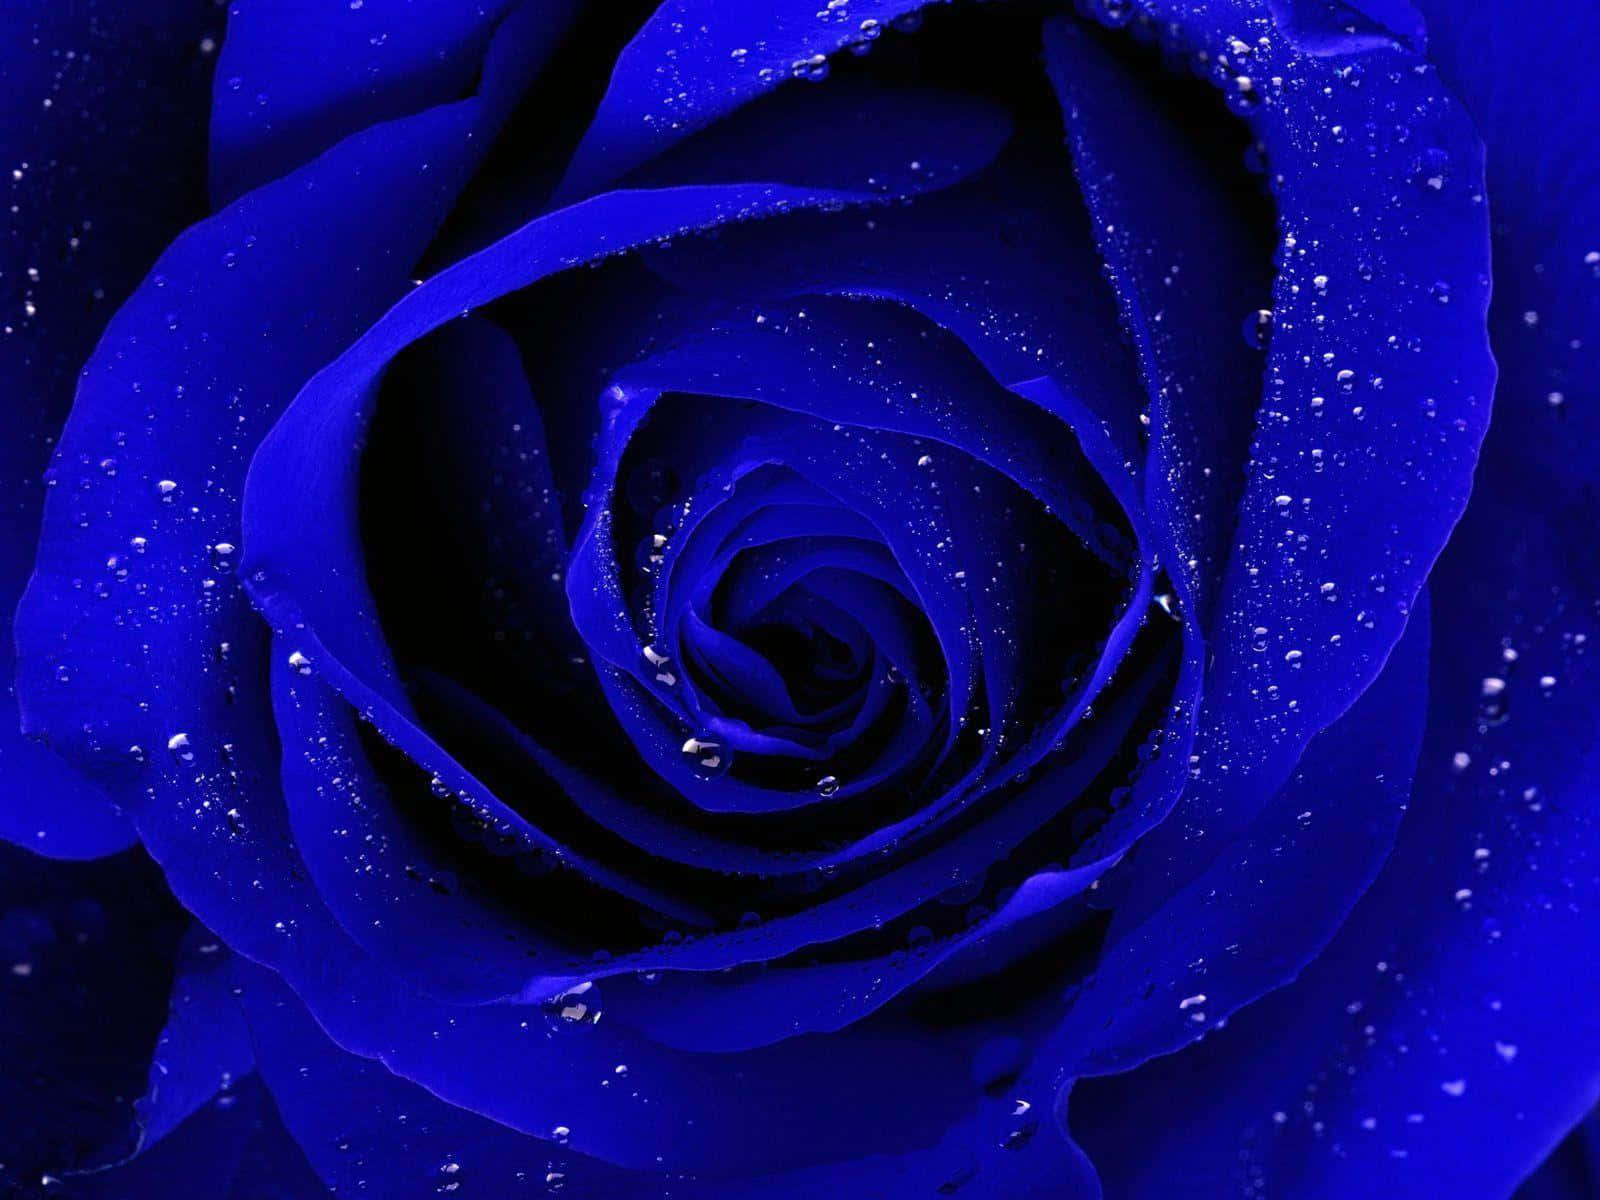 A Blue Rose With Water Drops On It